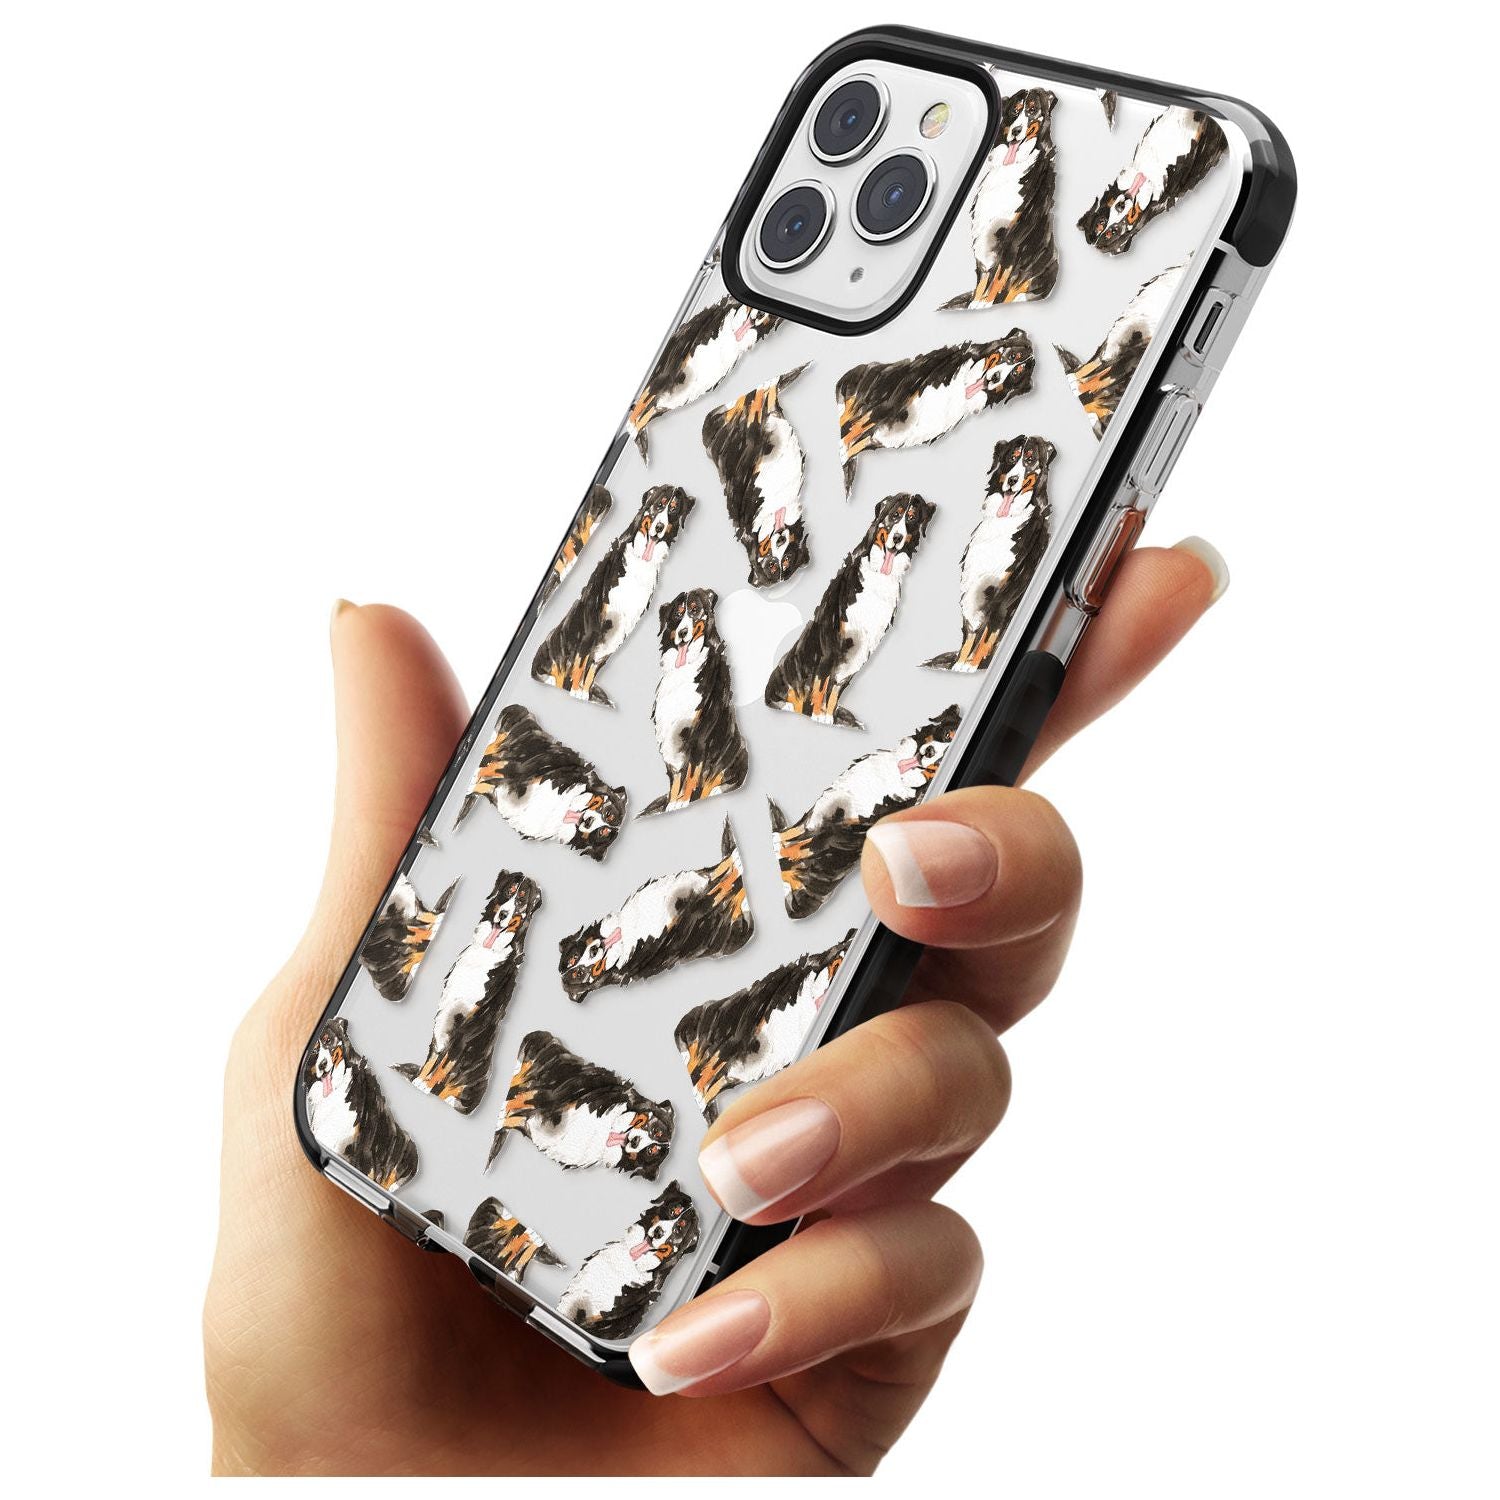 Bernese Mountain Dog Watercolour Dog Pattern Black Impact Phone Case for iPhone 11 Pro Max